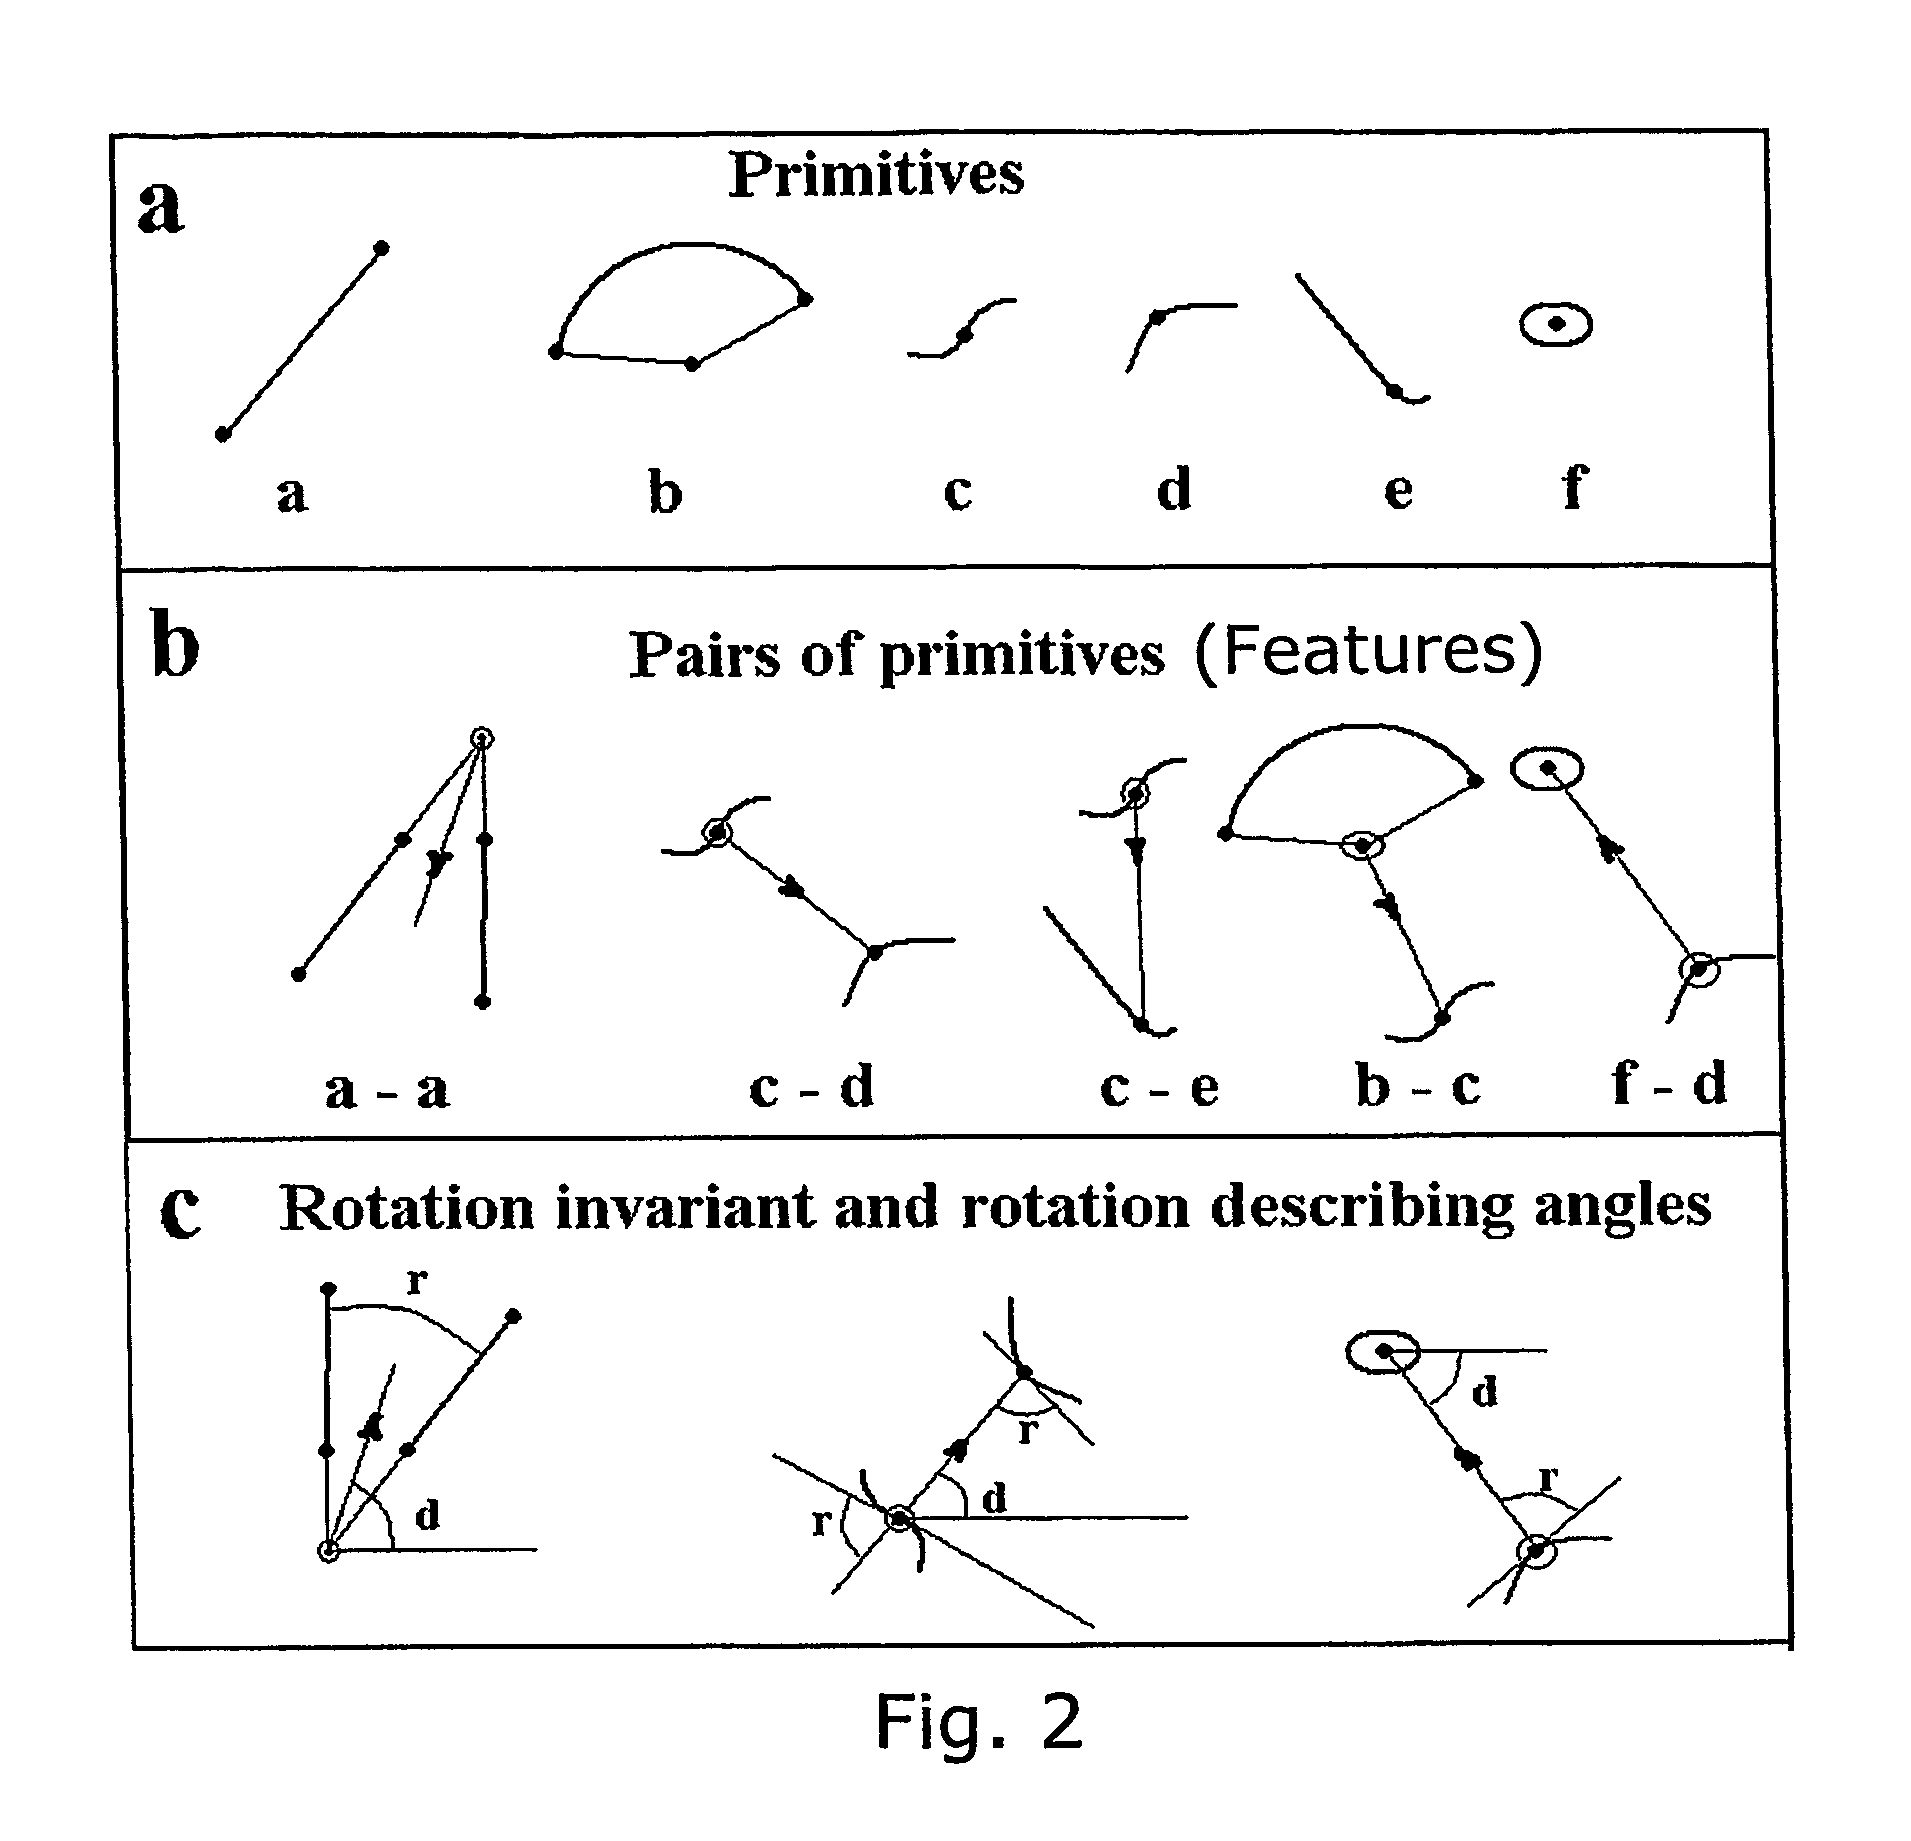 Computer-vision system for classification and spatial localization of bounded 3d-objects